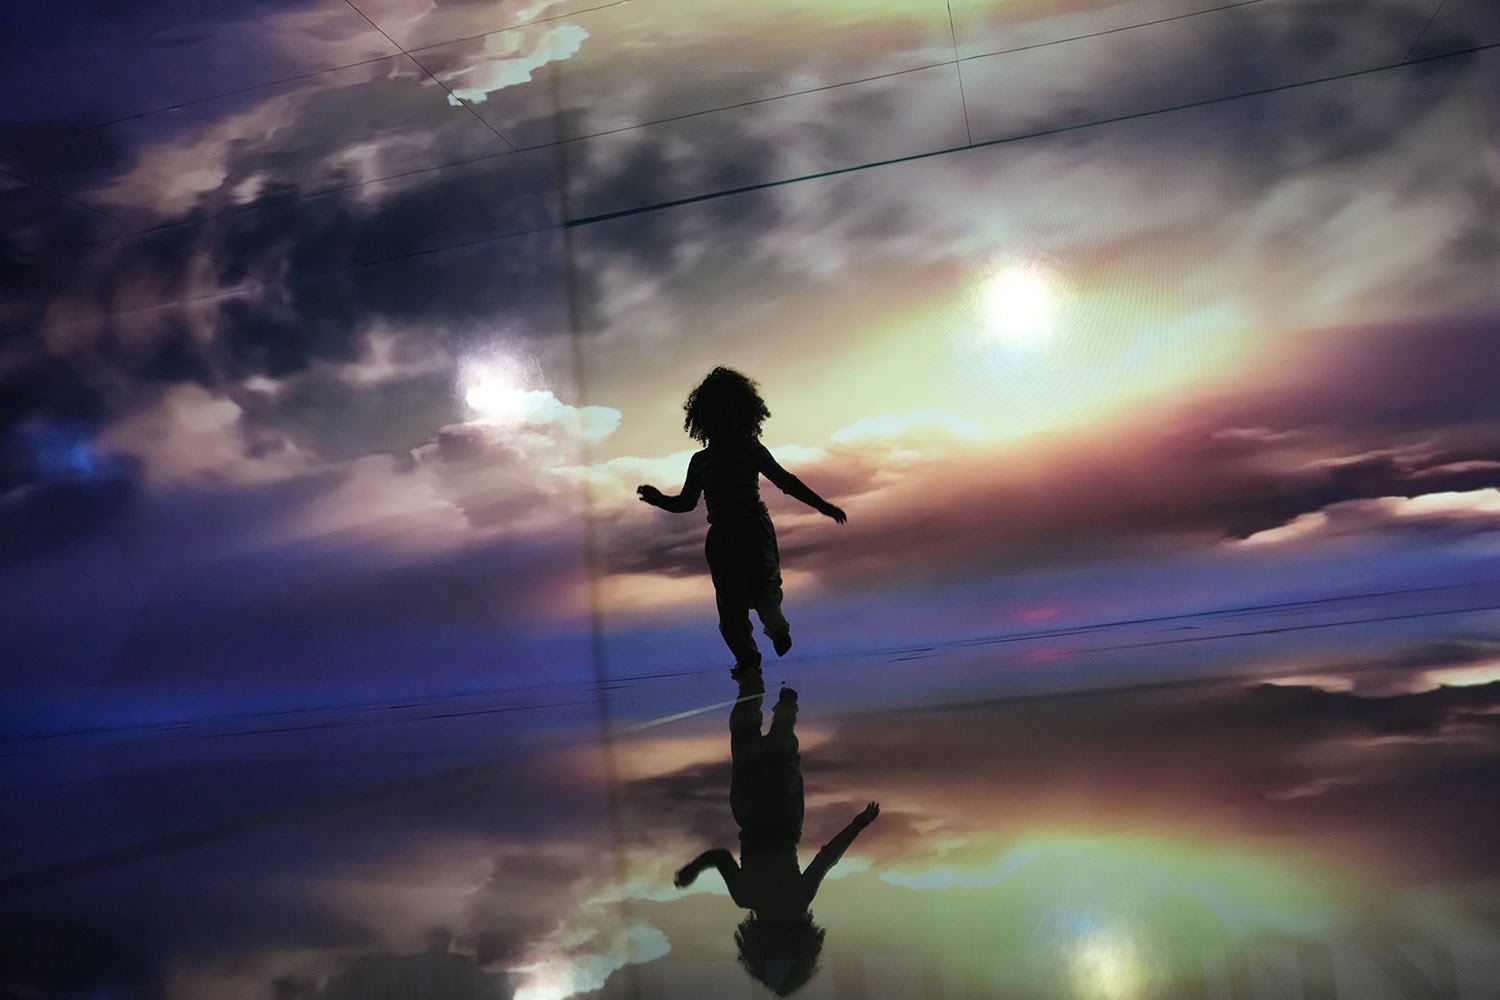  A child runs through a mirror installation titled Sea of Mirrors, featuring digital images of horizons, oceans and rivers, during a preview tour the day before the show's public opening at the AquaRio aquarium in Rio de Janeiro, Brazil, June 14, 202